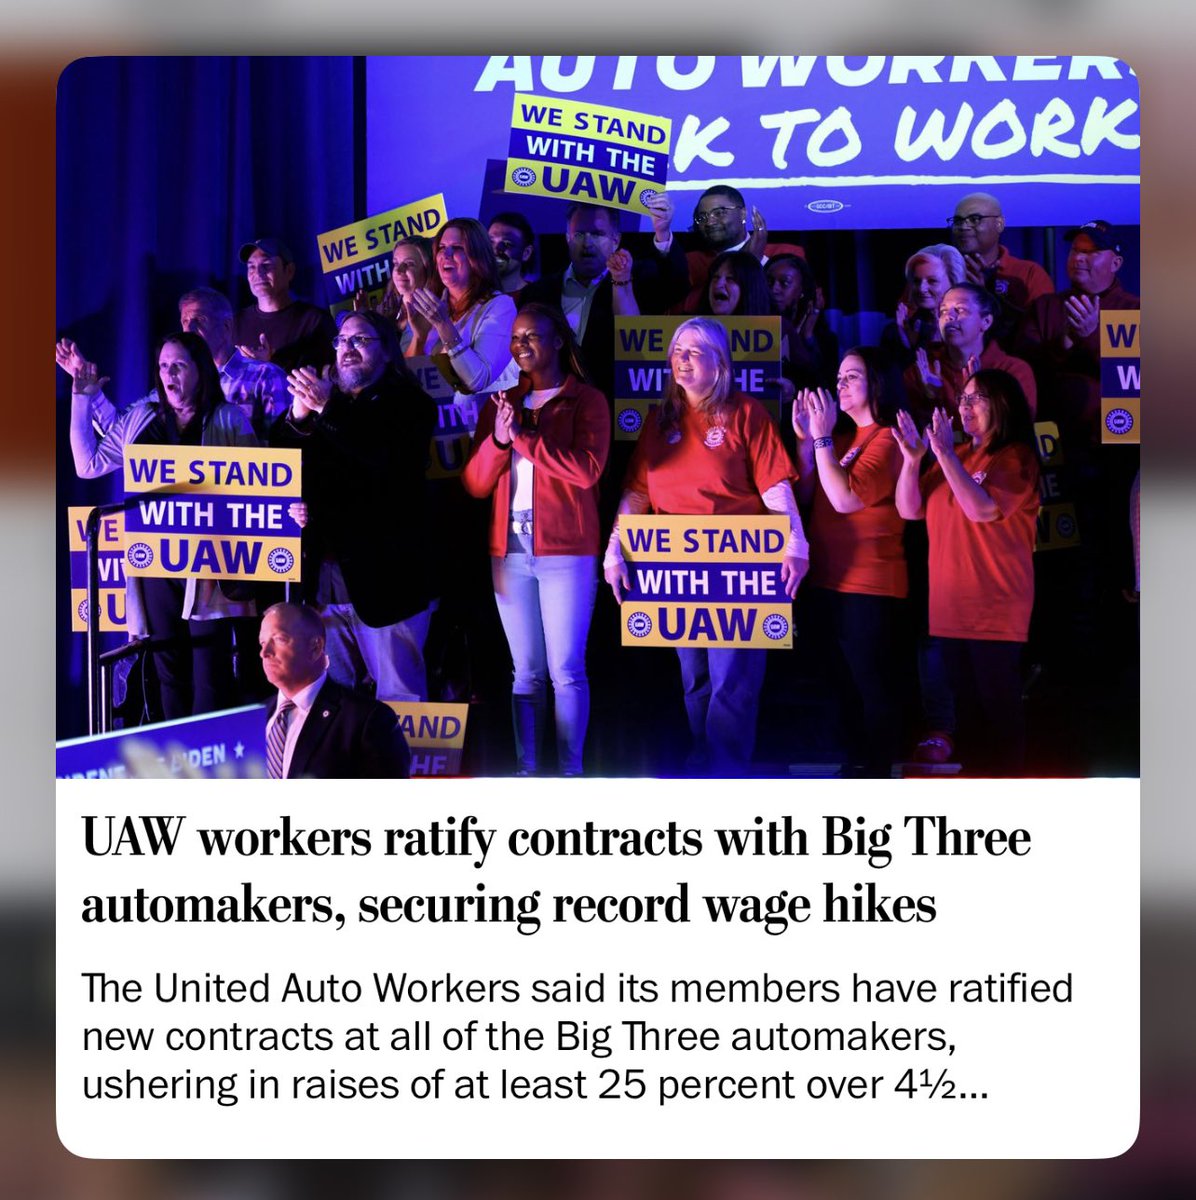 When workers win. >>>

That’s the #AmericanSpirit 
@UAW